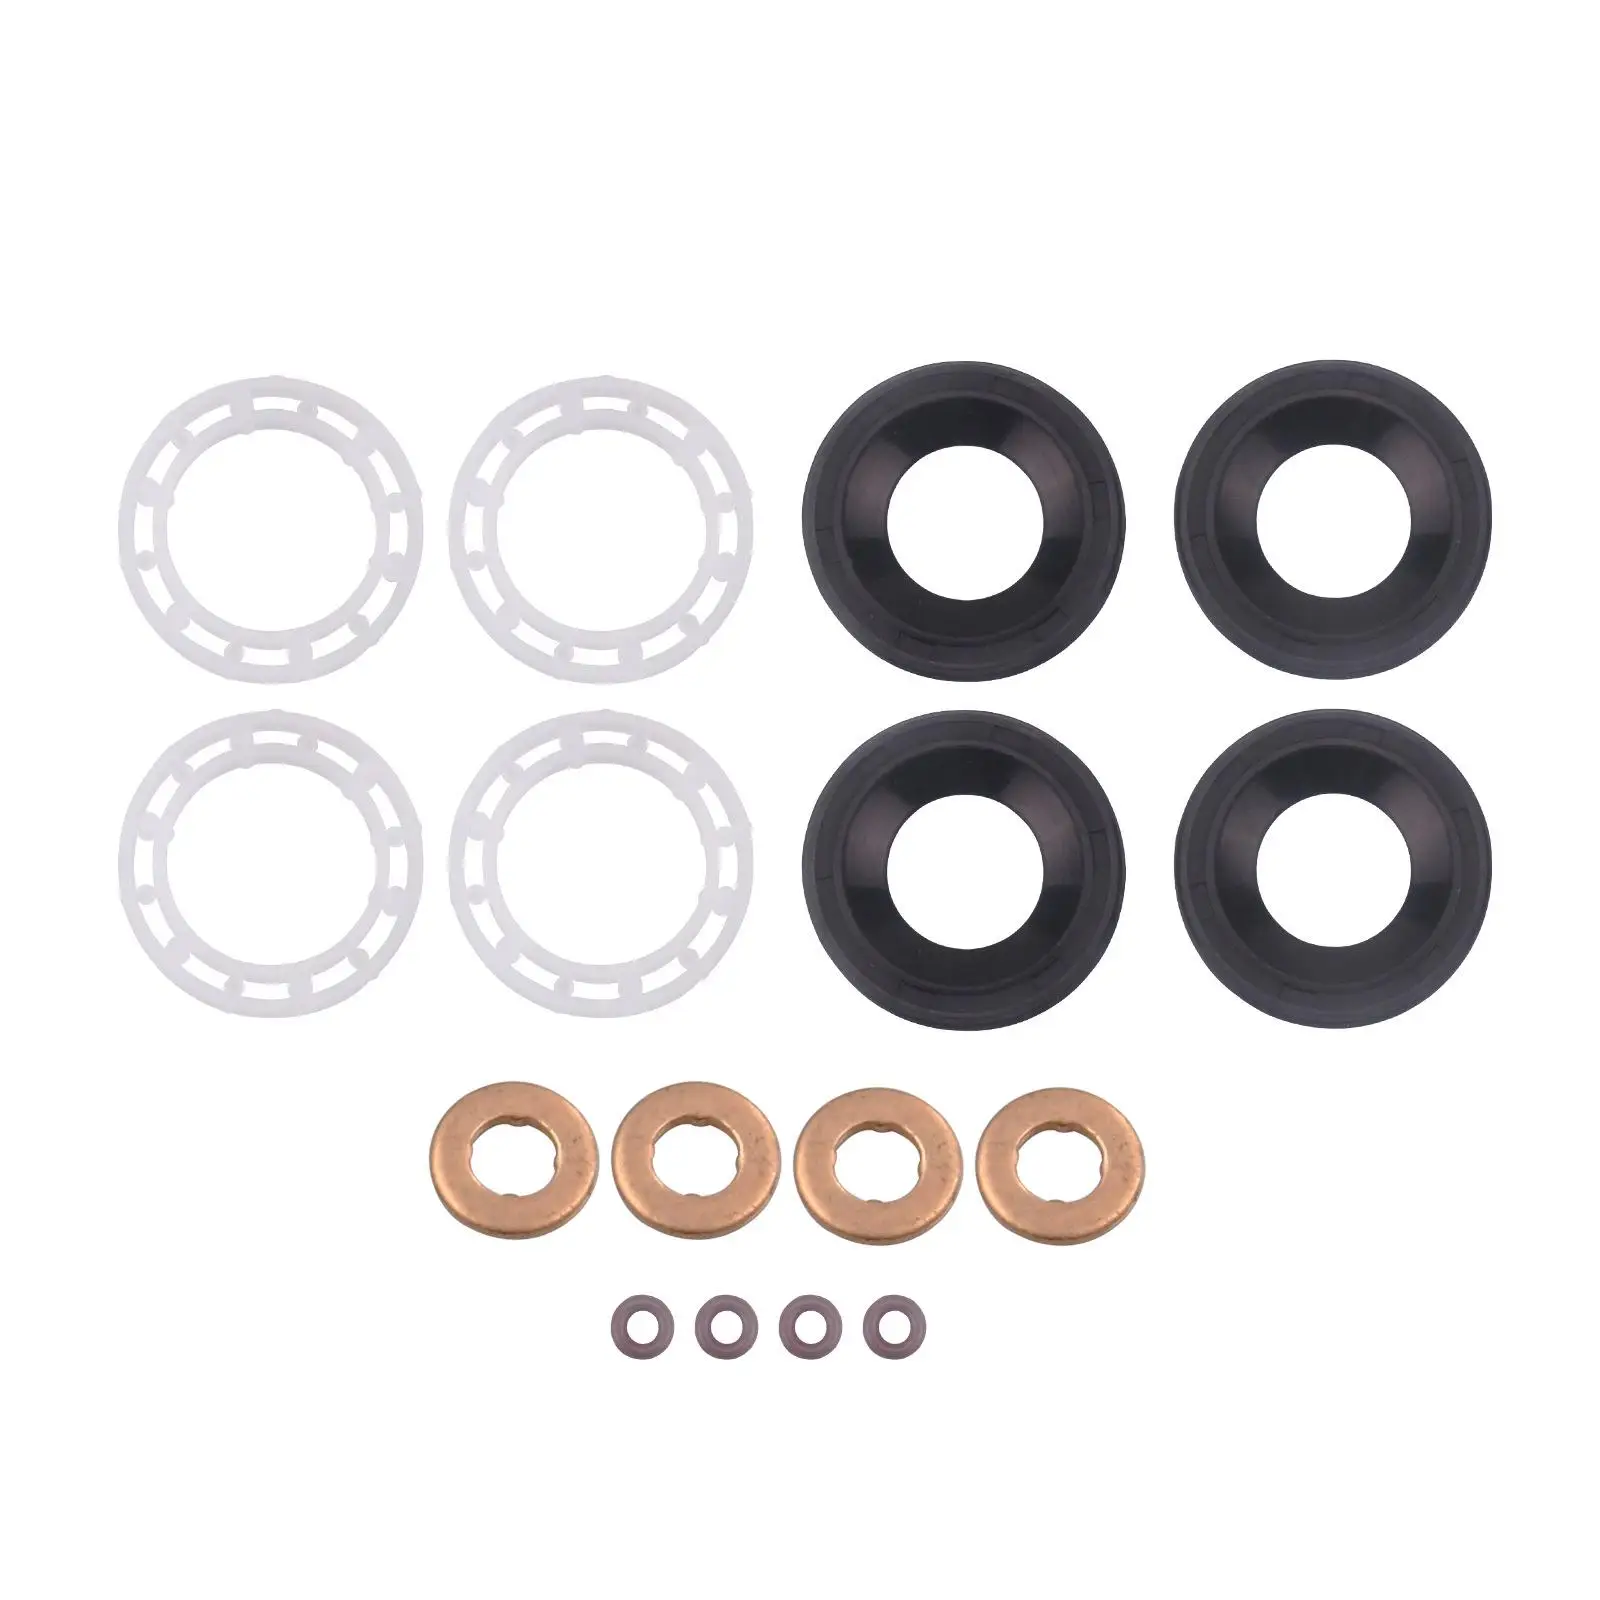 Diesel injectors Seals Protectors Portable 1982A0 Copper Washers 1.6 Hdi Seal Washer Kit for Peugeot Citroen Direct Replaces